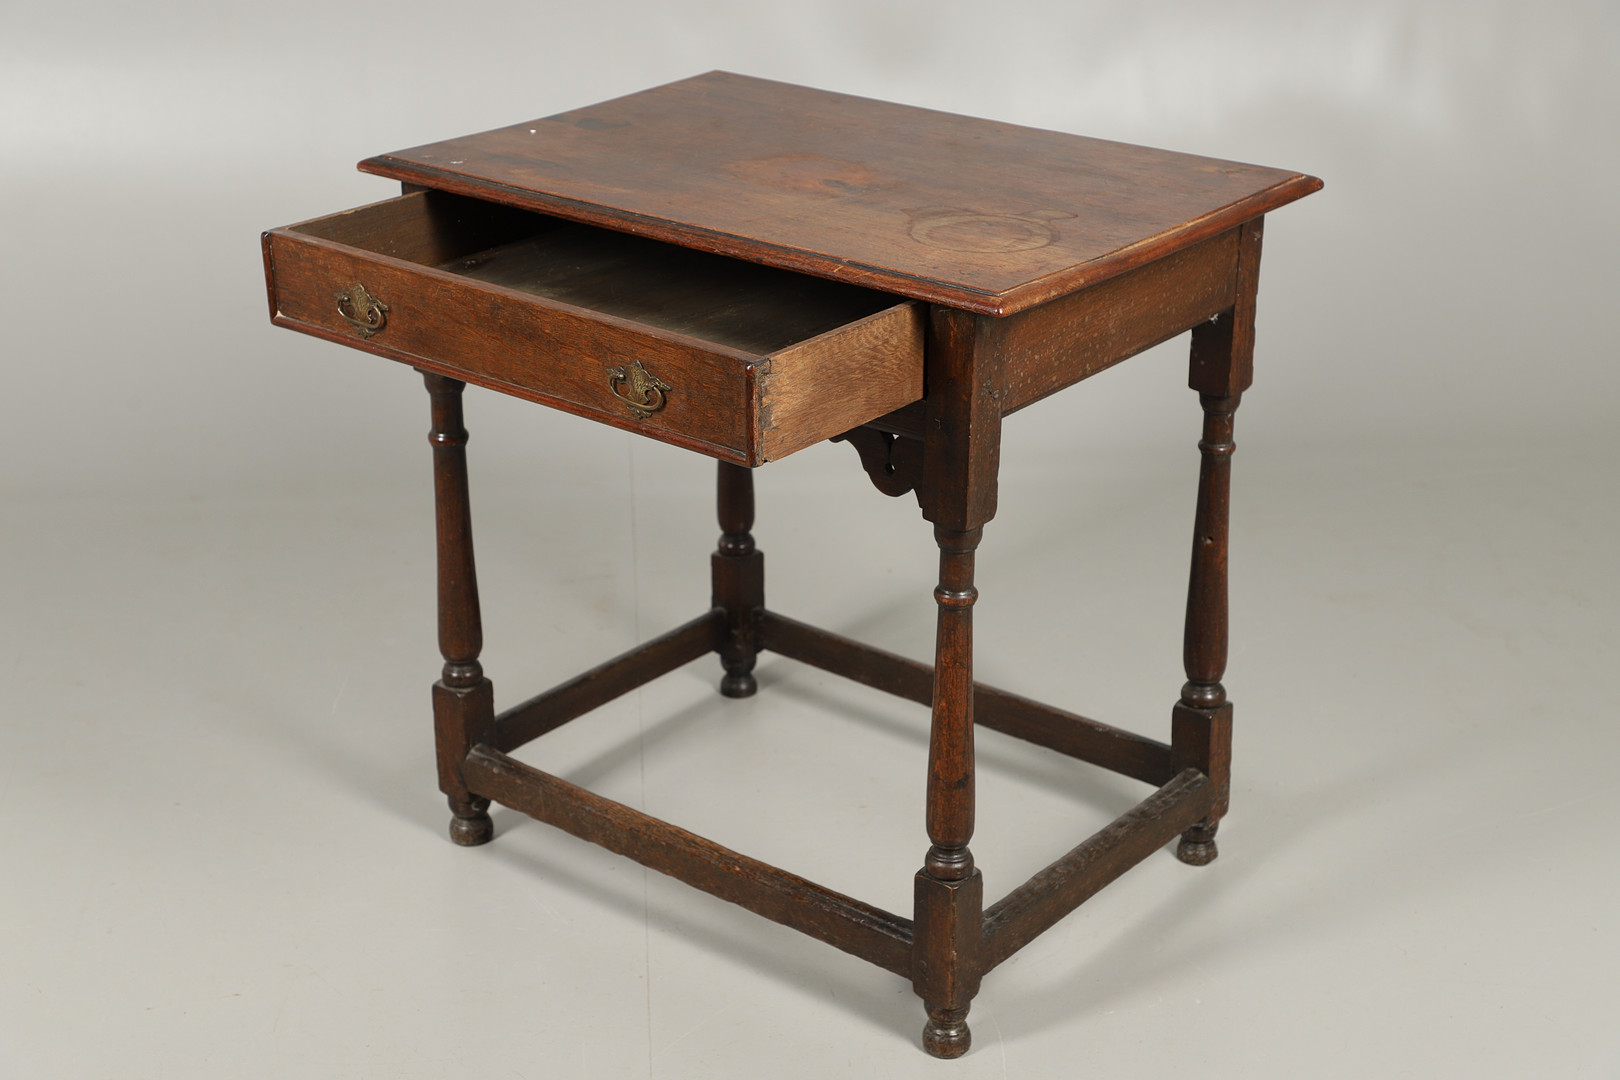 AN EARLY 19TH CENTURY OAK SIDE TABLE, CIRCA 1800. - Image 4 of 7